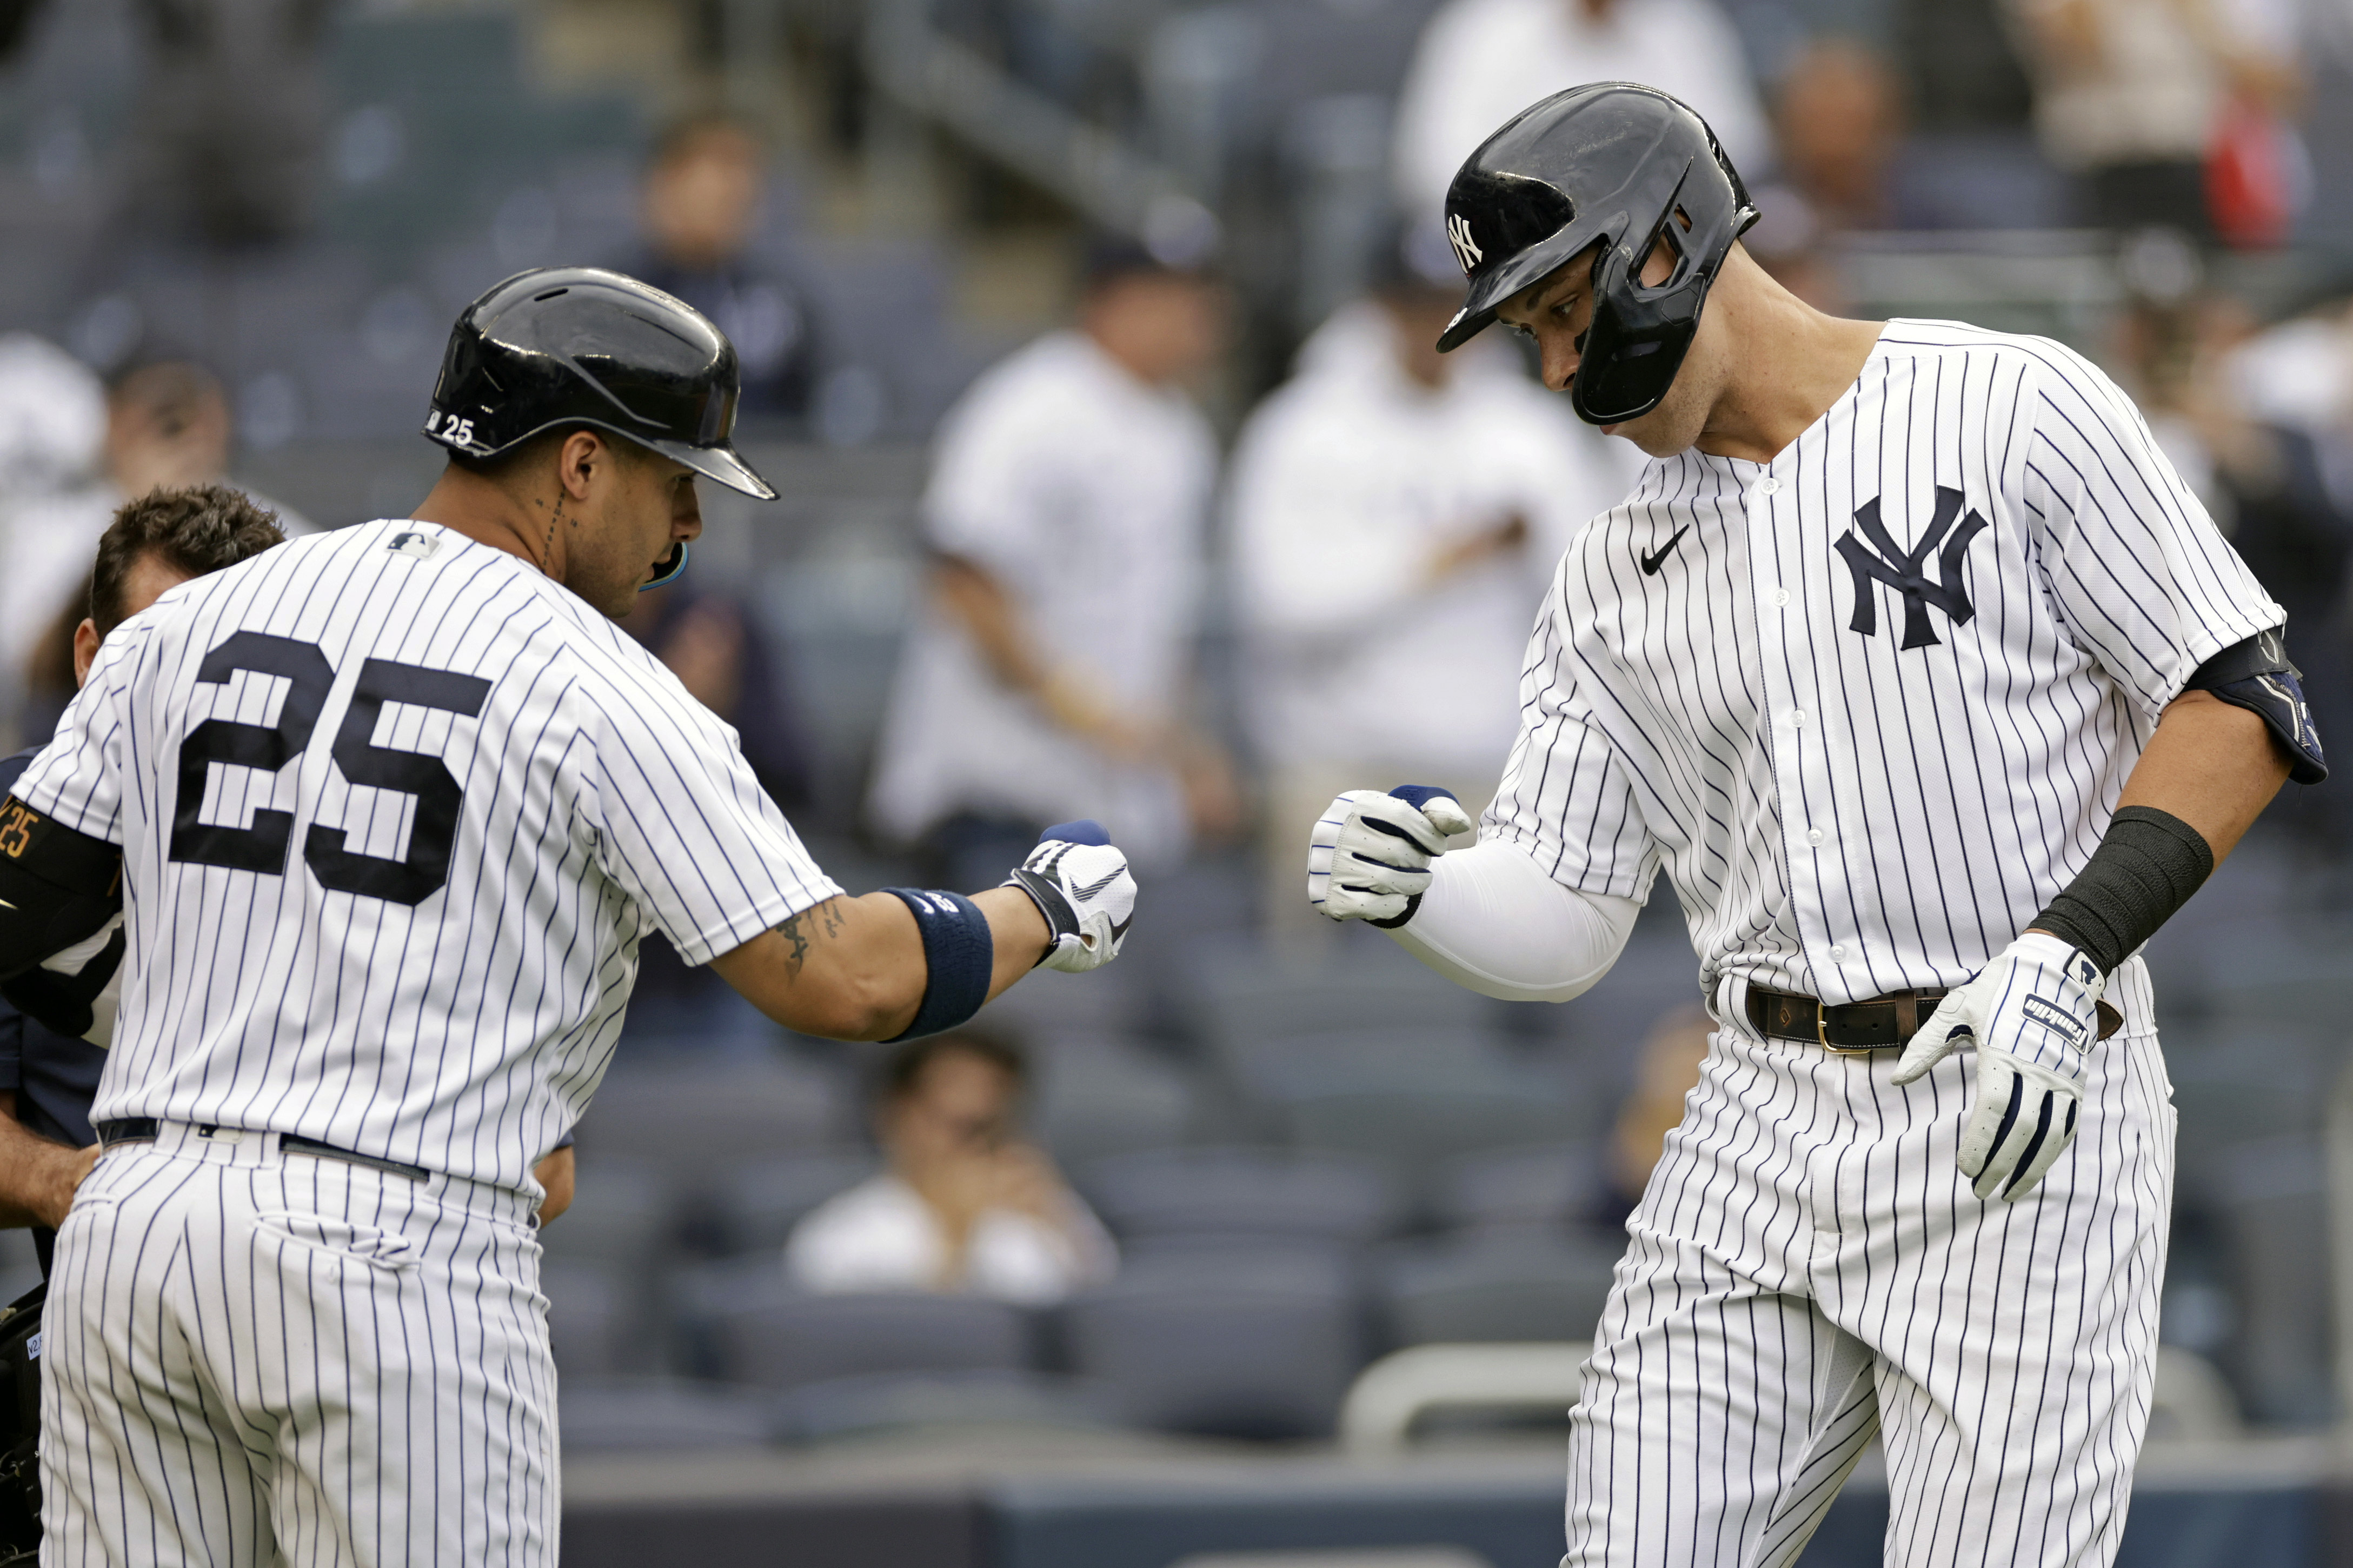 New York Yankees game today: TV schedule, channel, and more